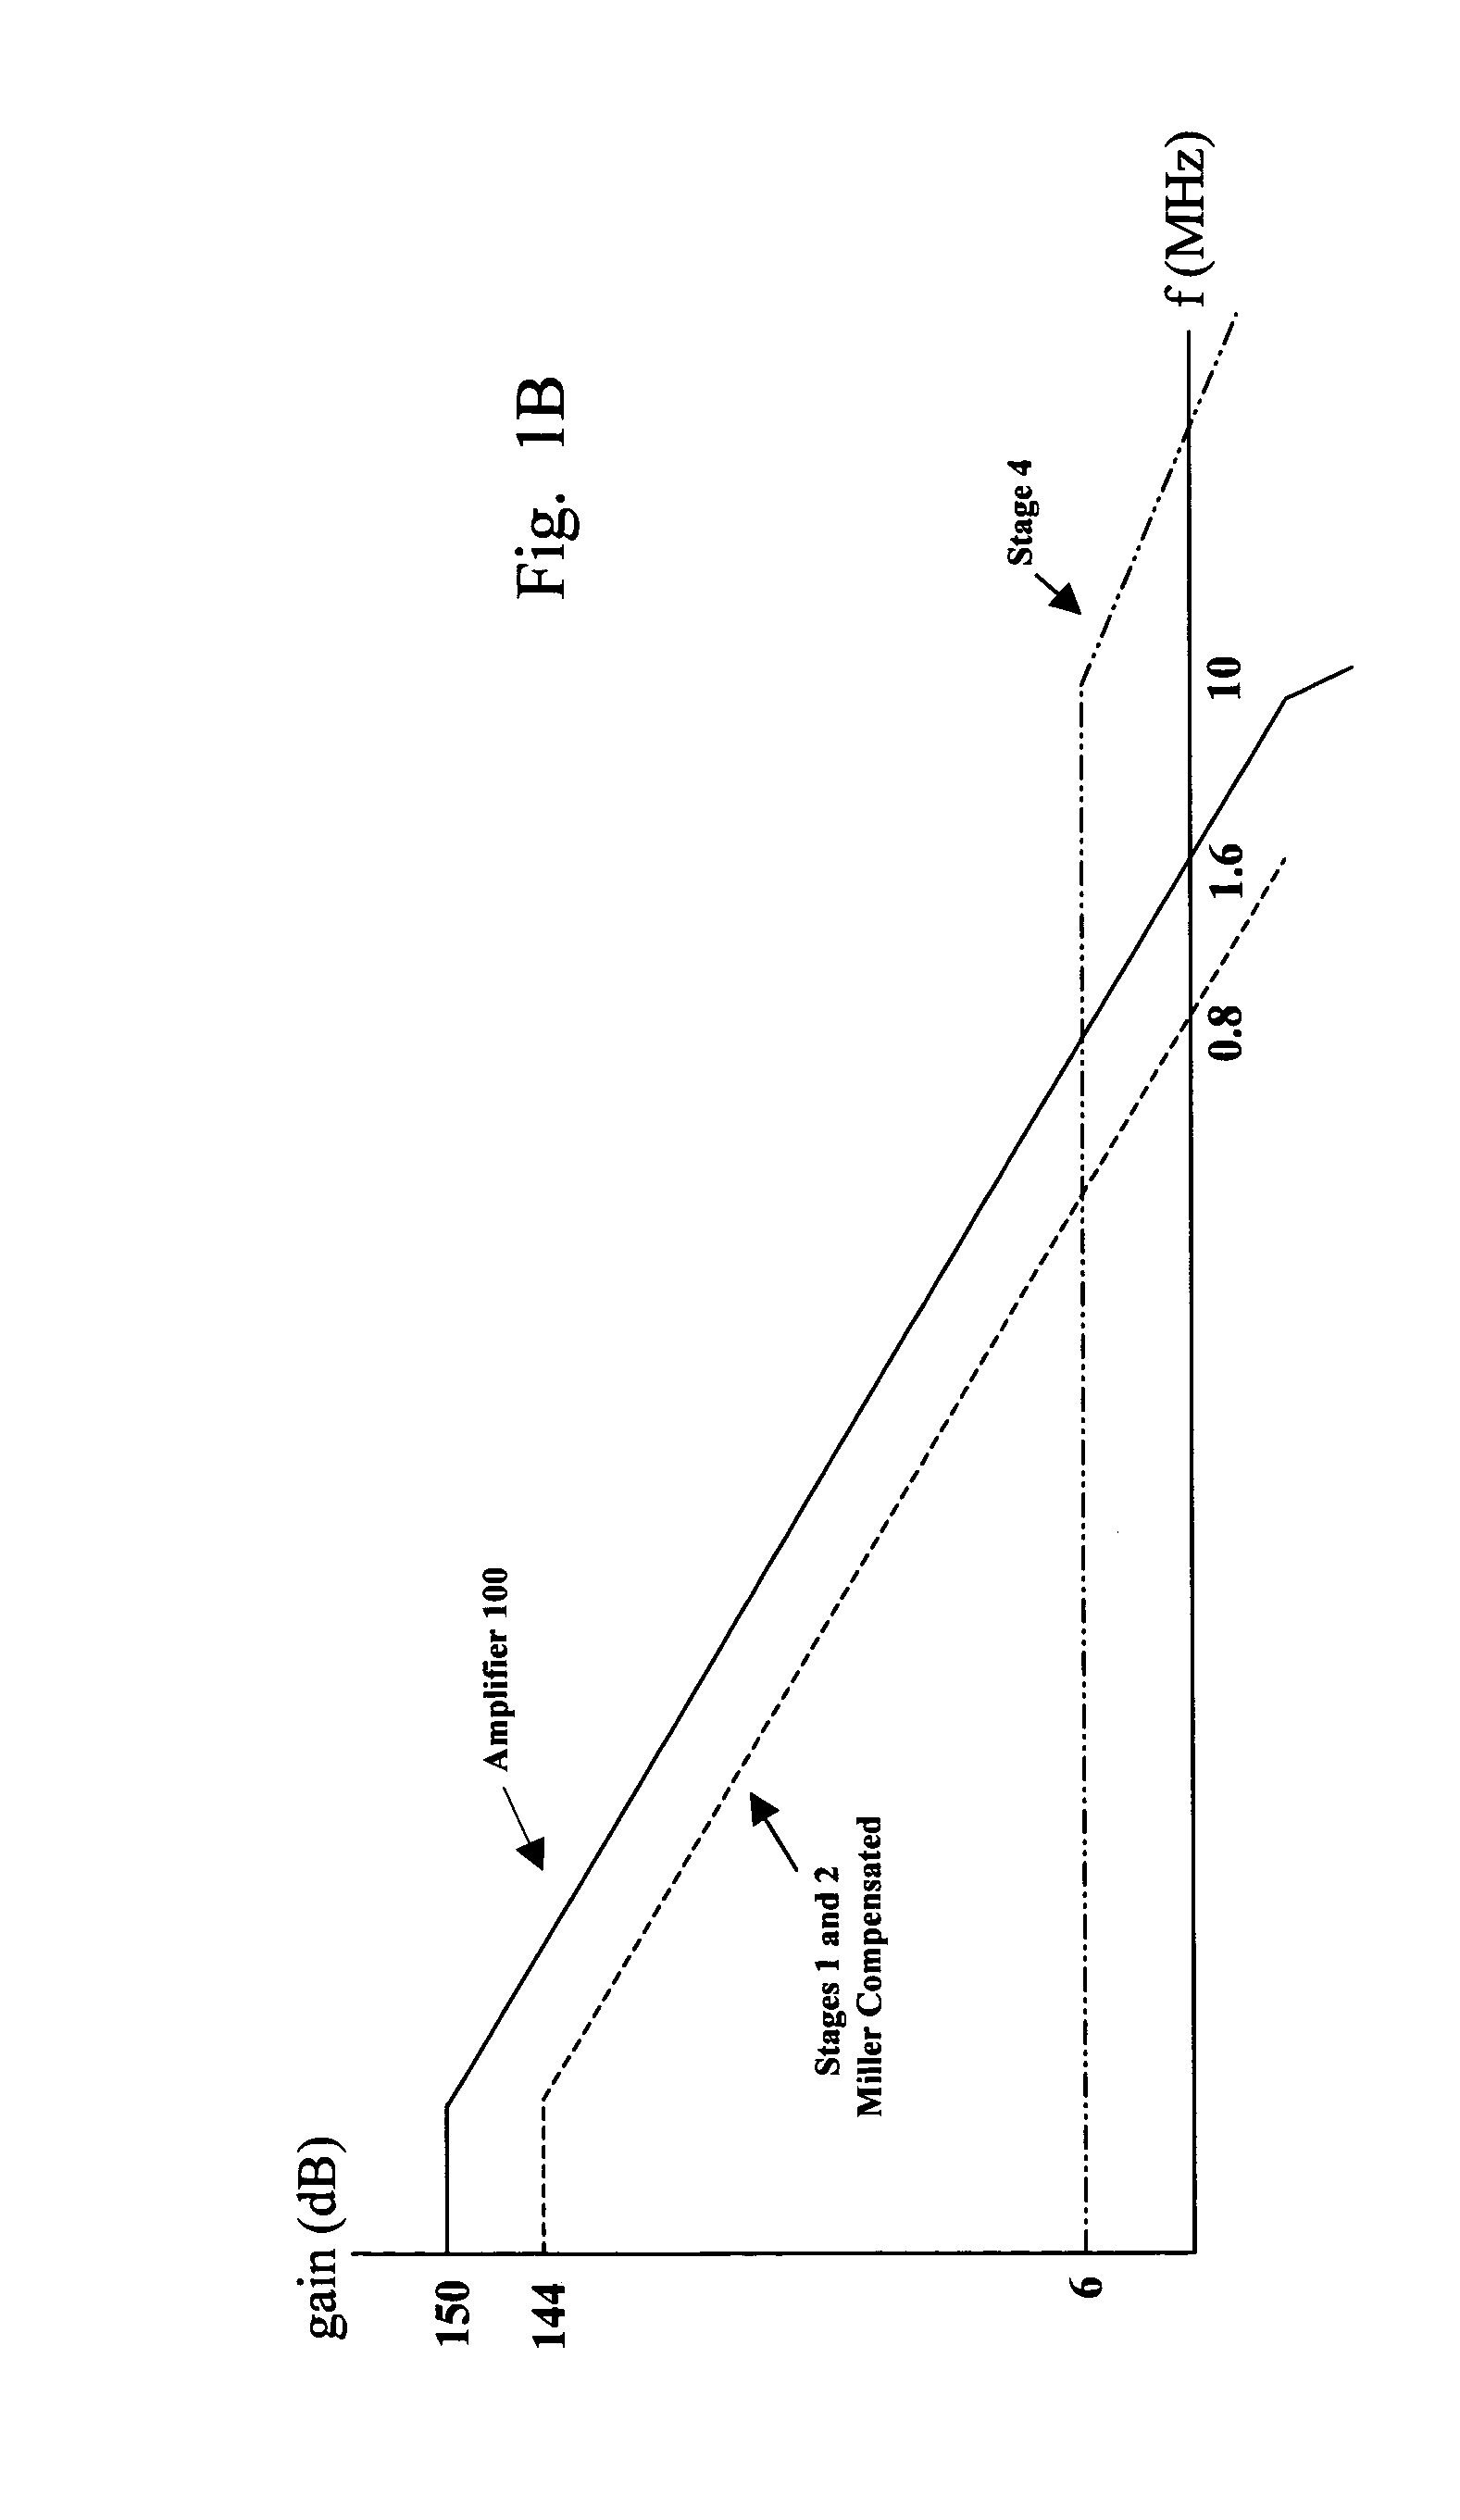 Multiple-stage operational amplifier and methods and systems utilizing the same